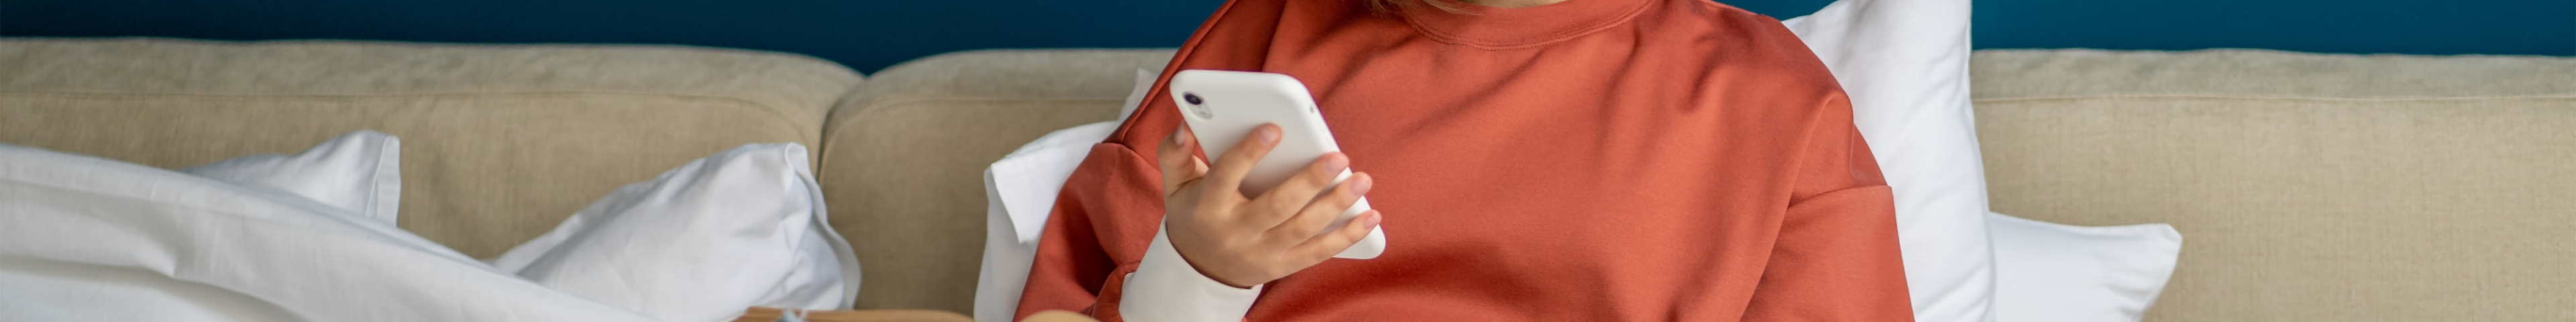 Image of a teen girl sitting in bed, holding her phone.